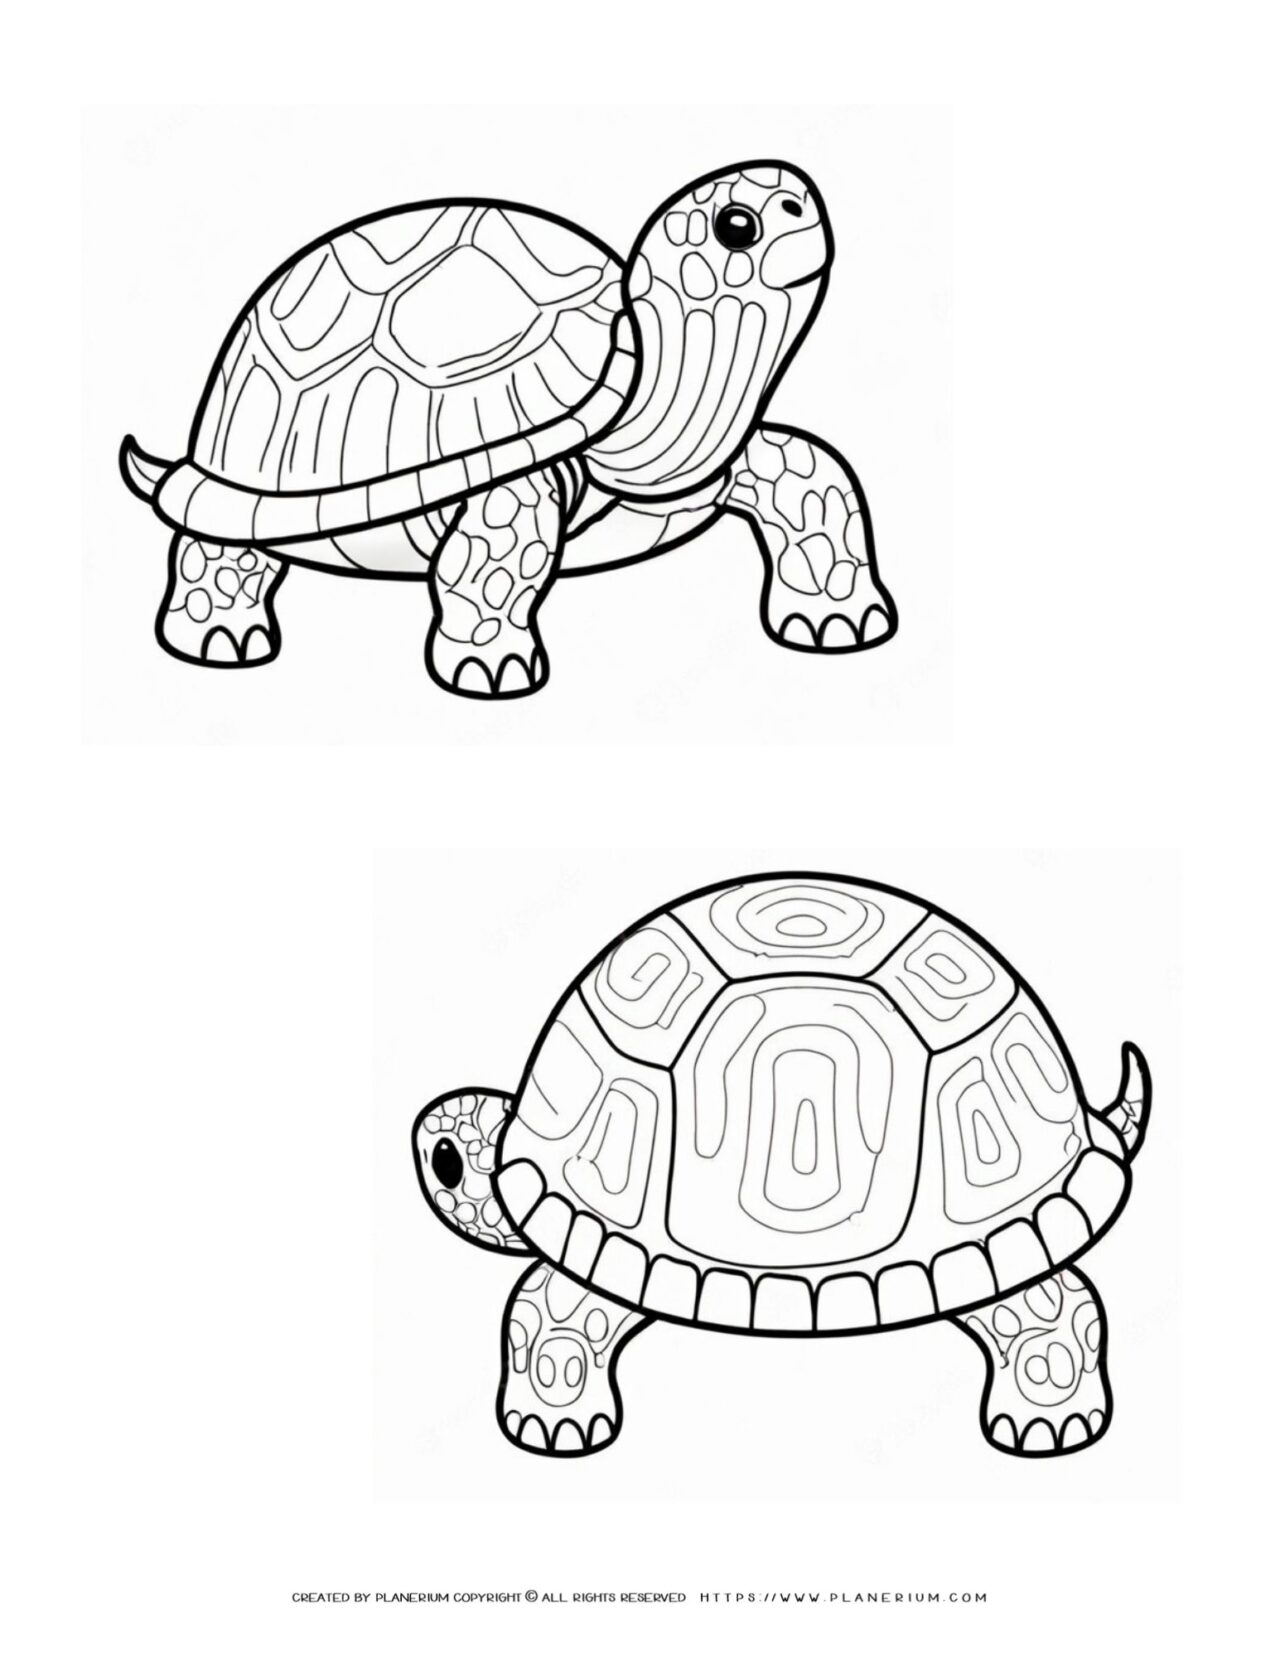 Detailed-Two-Turtles-Front-and-Side-View-Coloring-Page-for-Kids